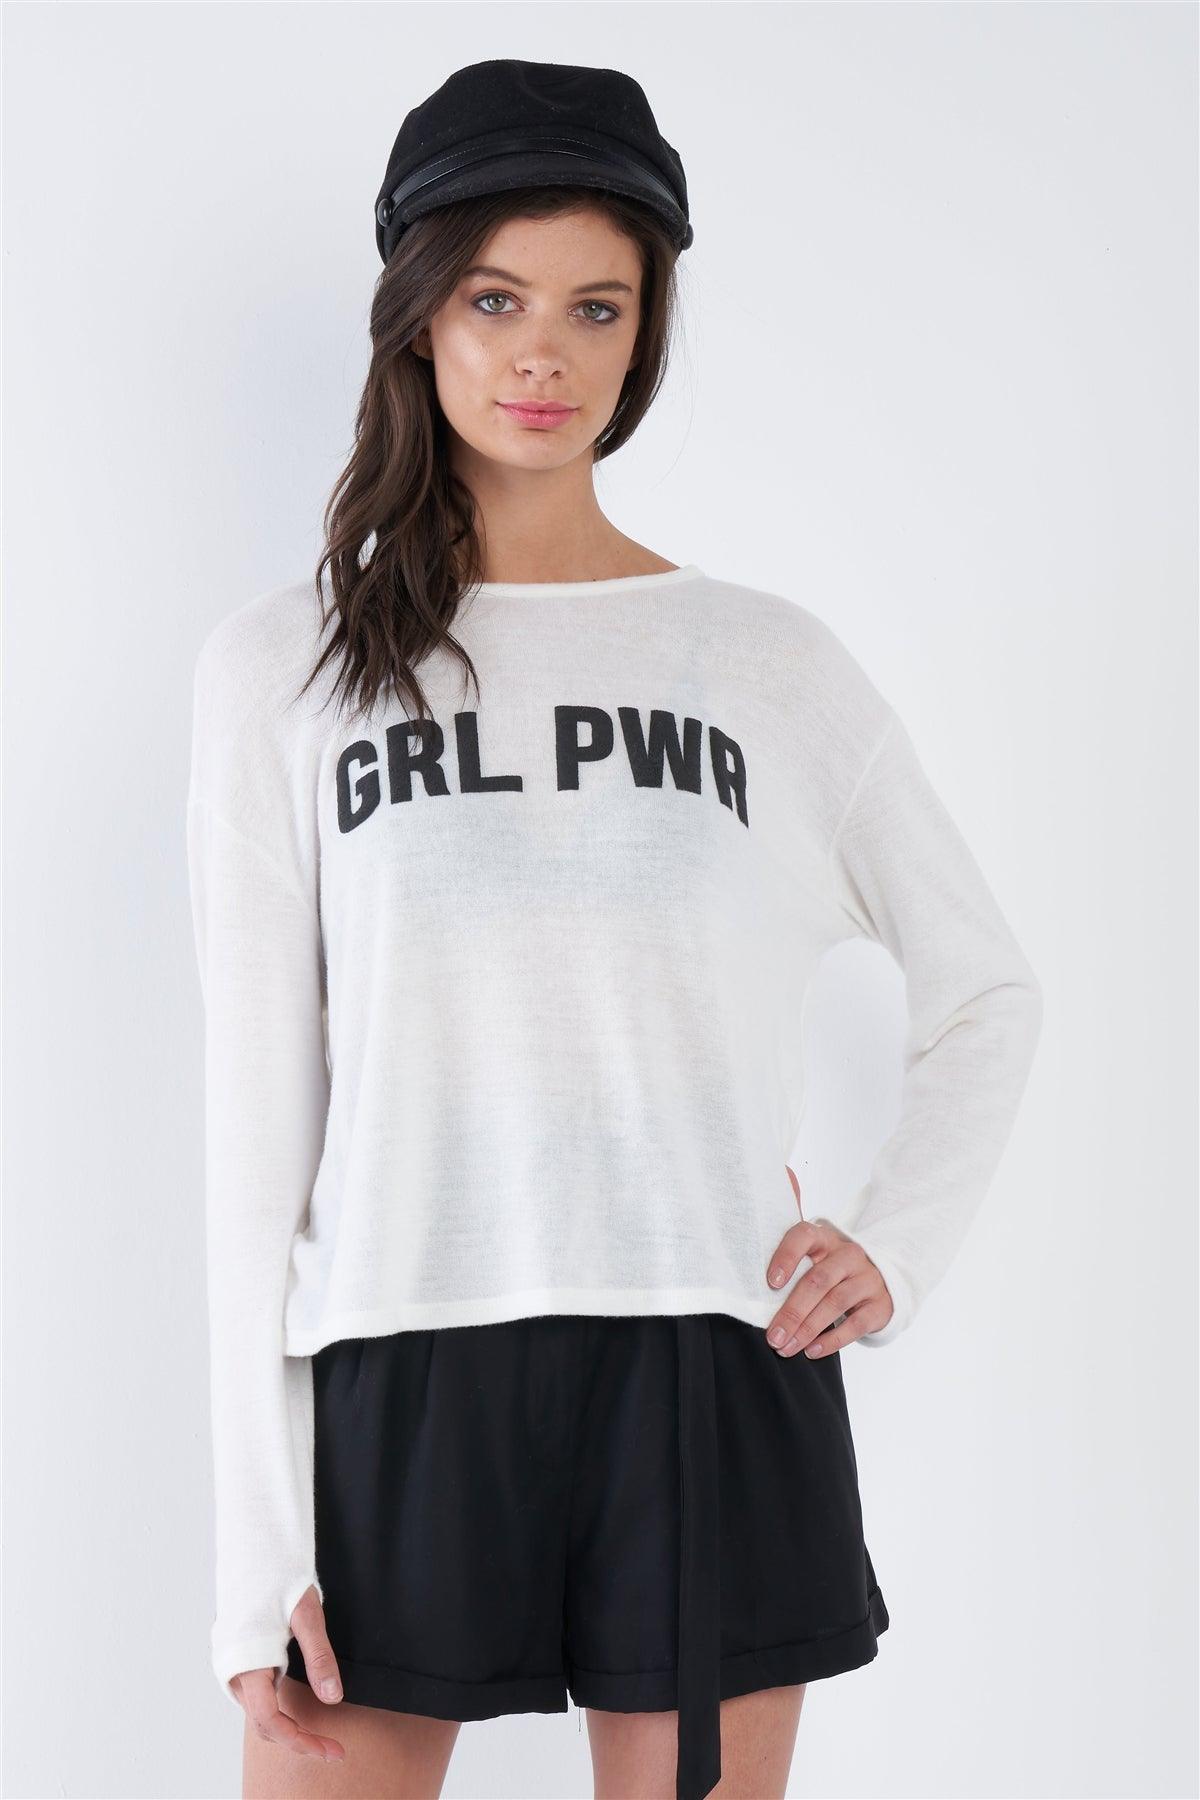 Off-White "GRL PWR" Long Sleeve Thumb Hole Top